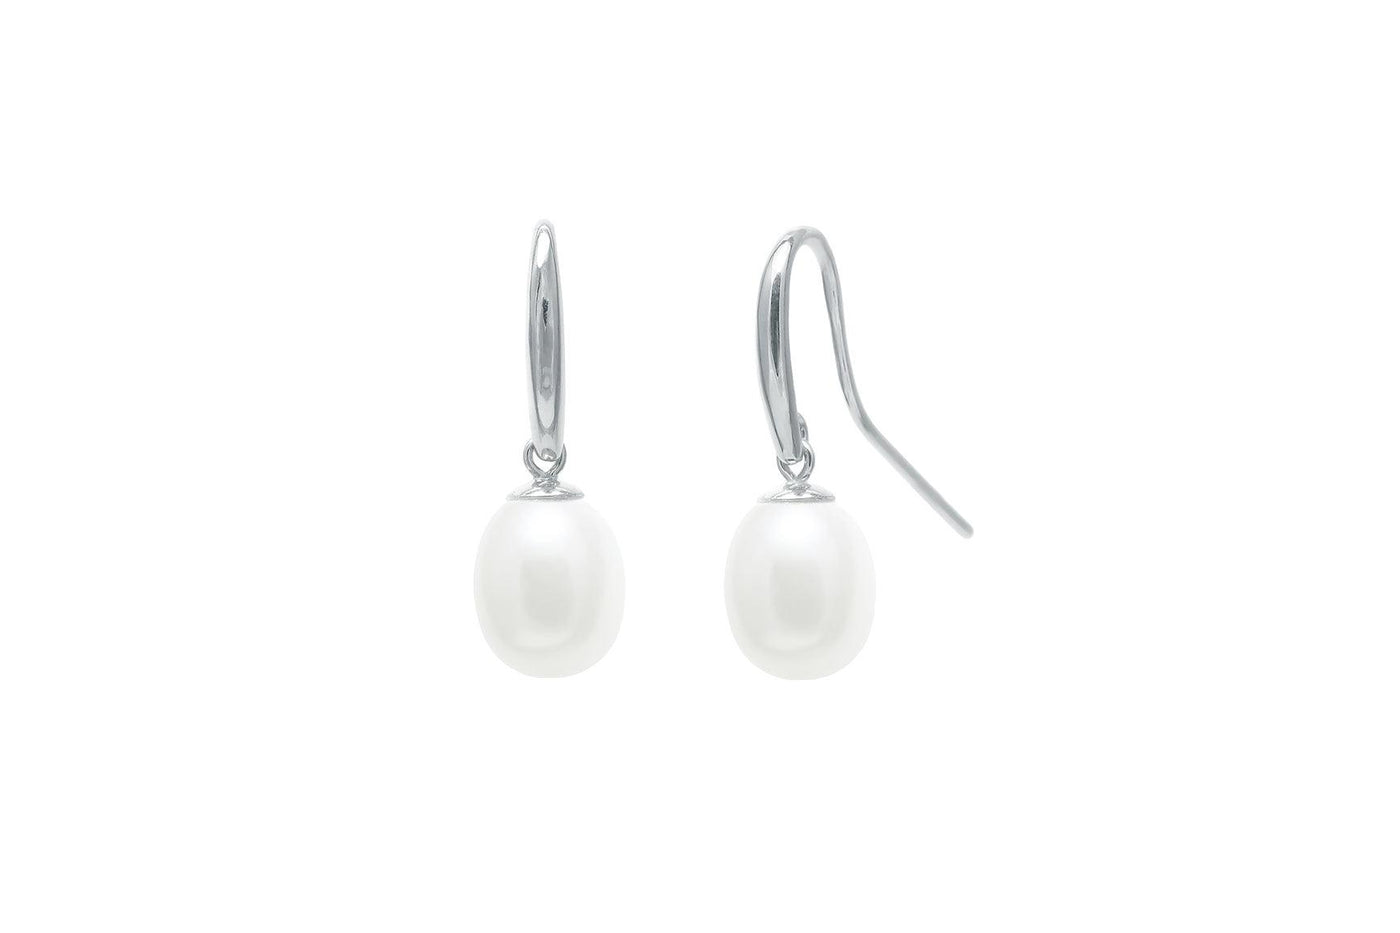 9ct Yellow or White Gold Cultured White River Pearls Drop Earrings - Rococo Jewellery